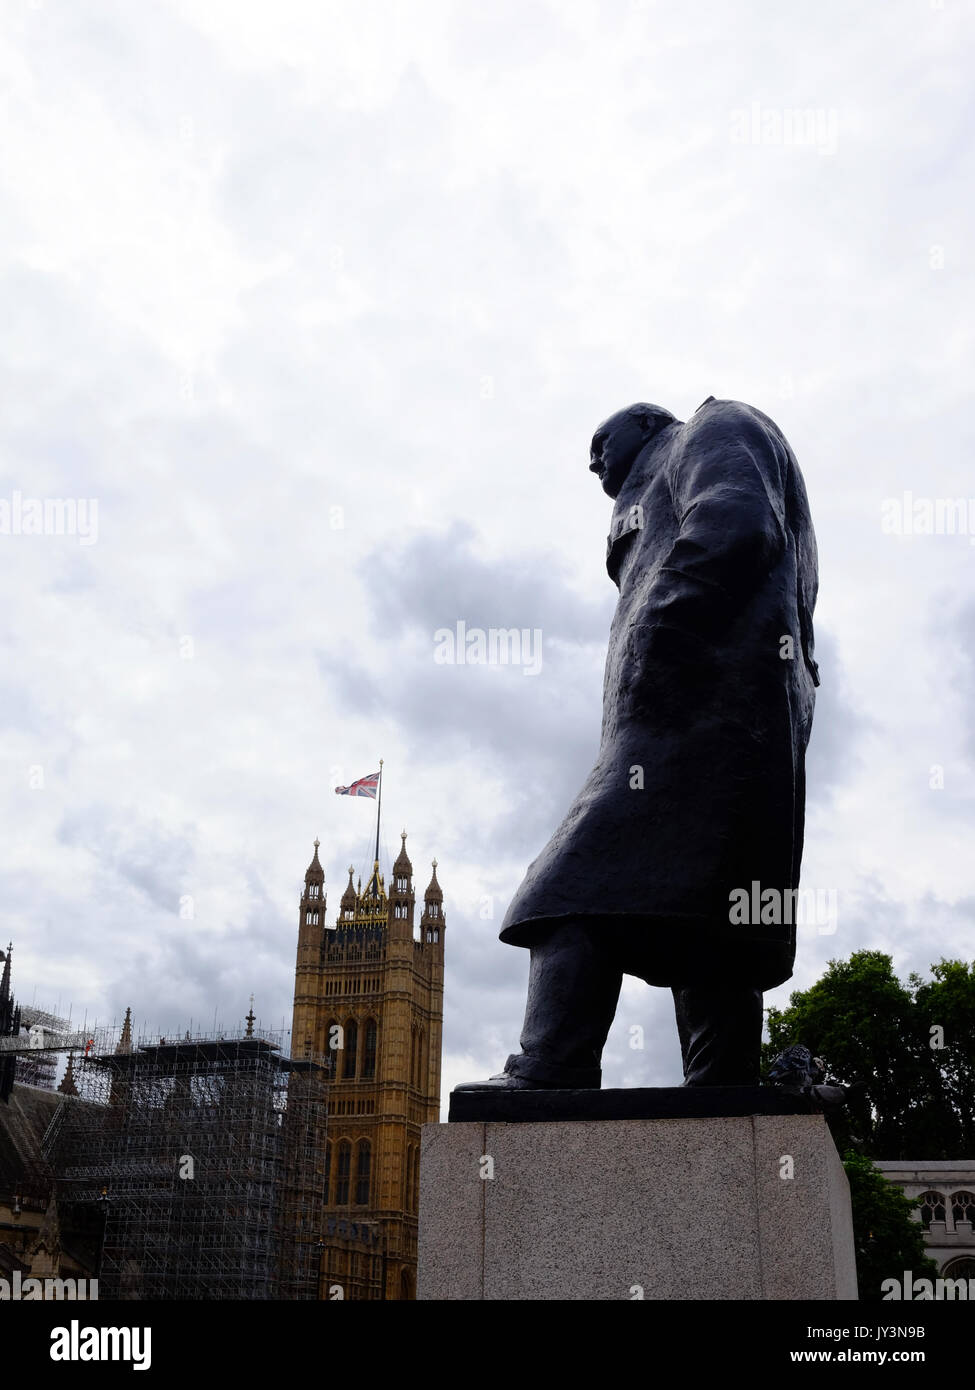 The statue of Winston Churchill in Parliament Square, London, looking over the Houses of Parliament as Big Ben goes silent. Stock Photo